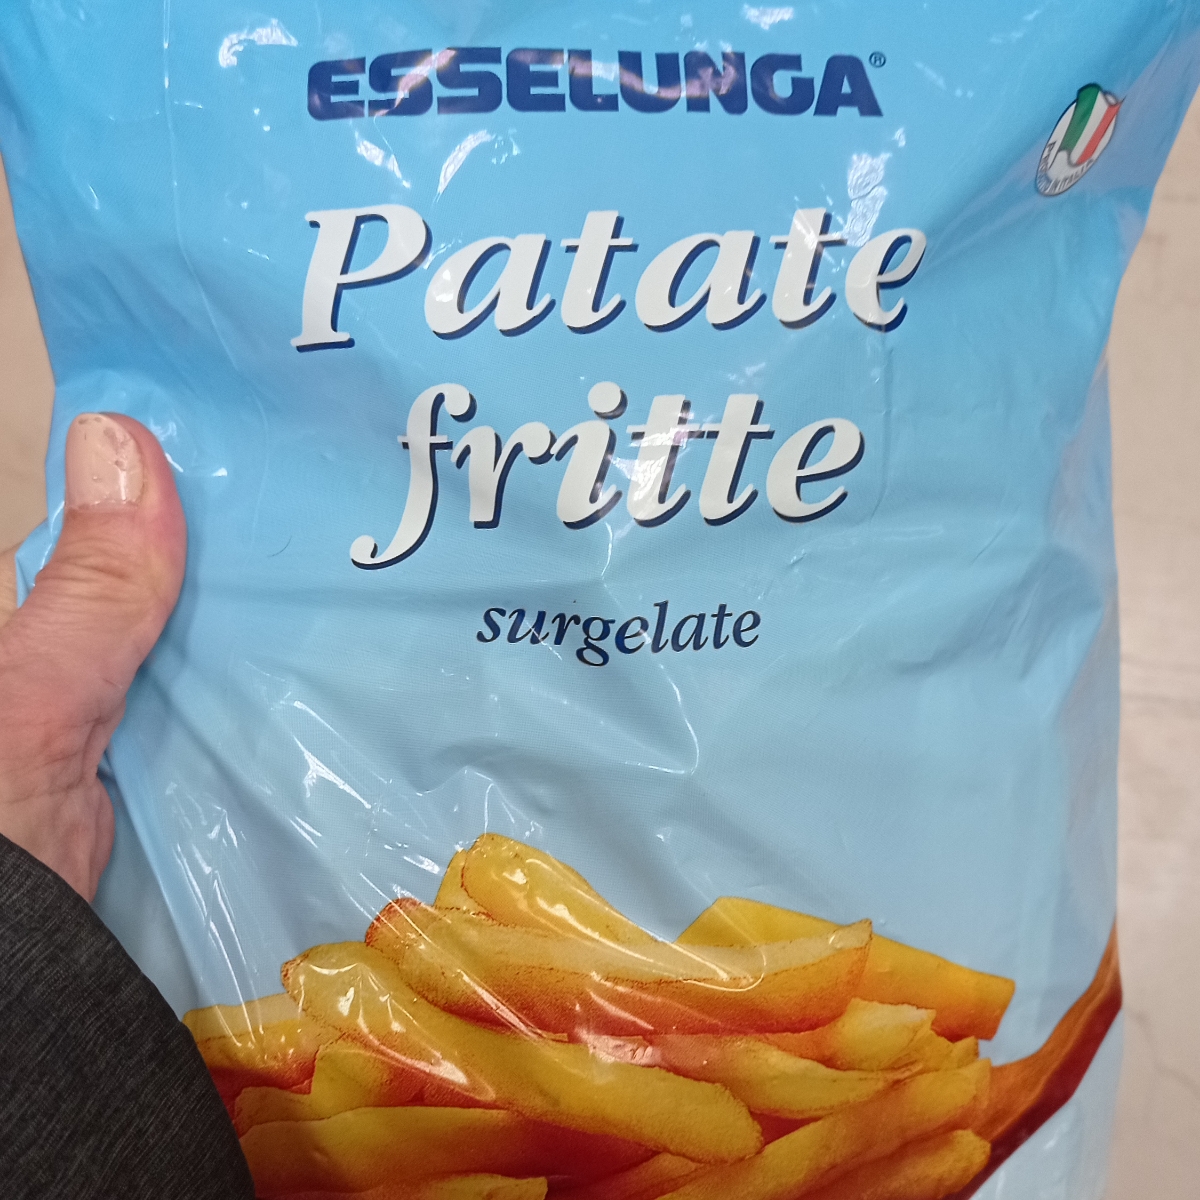 Esselunga Patate fritte surgelate Review